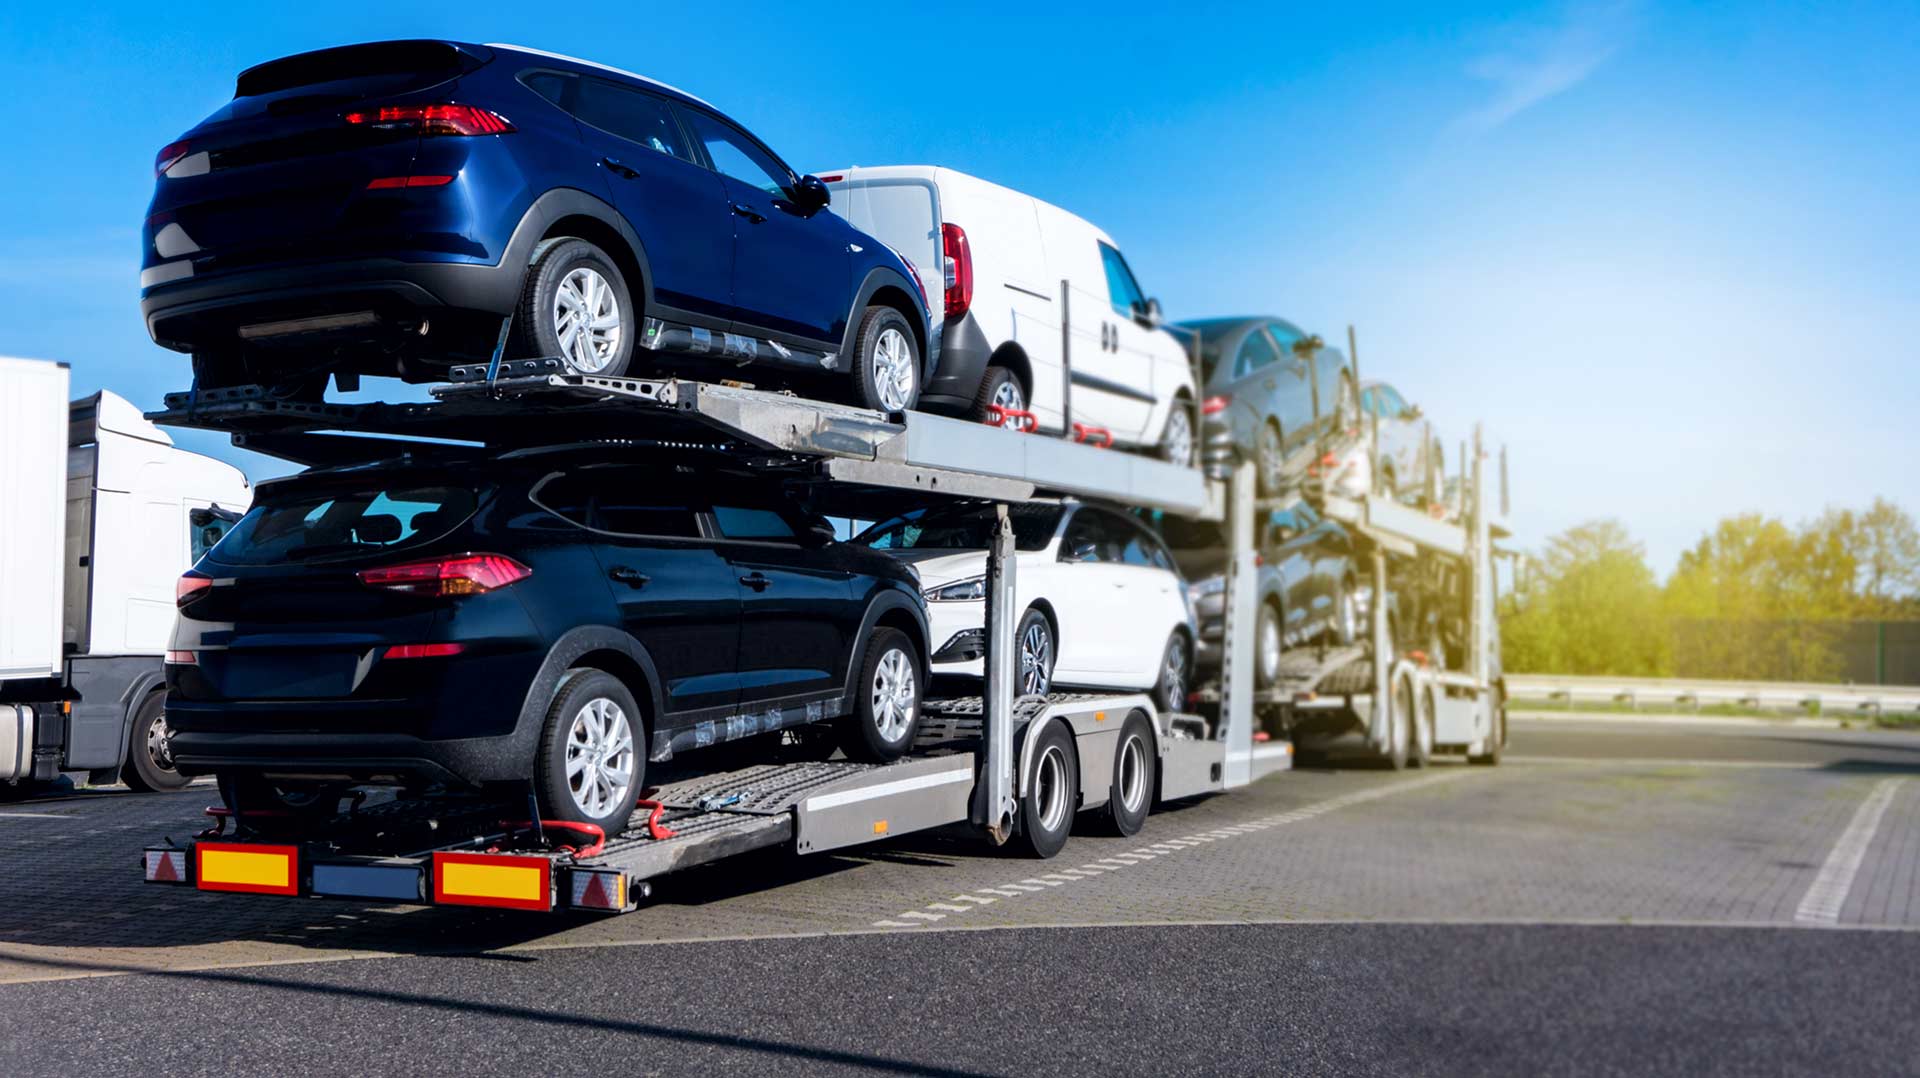 Affordable Vehicle Transport Companies in California